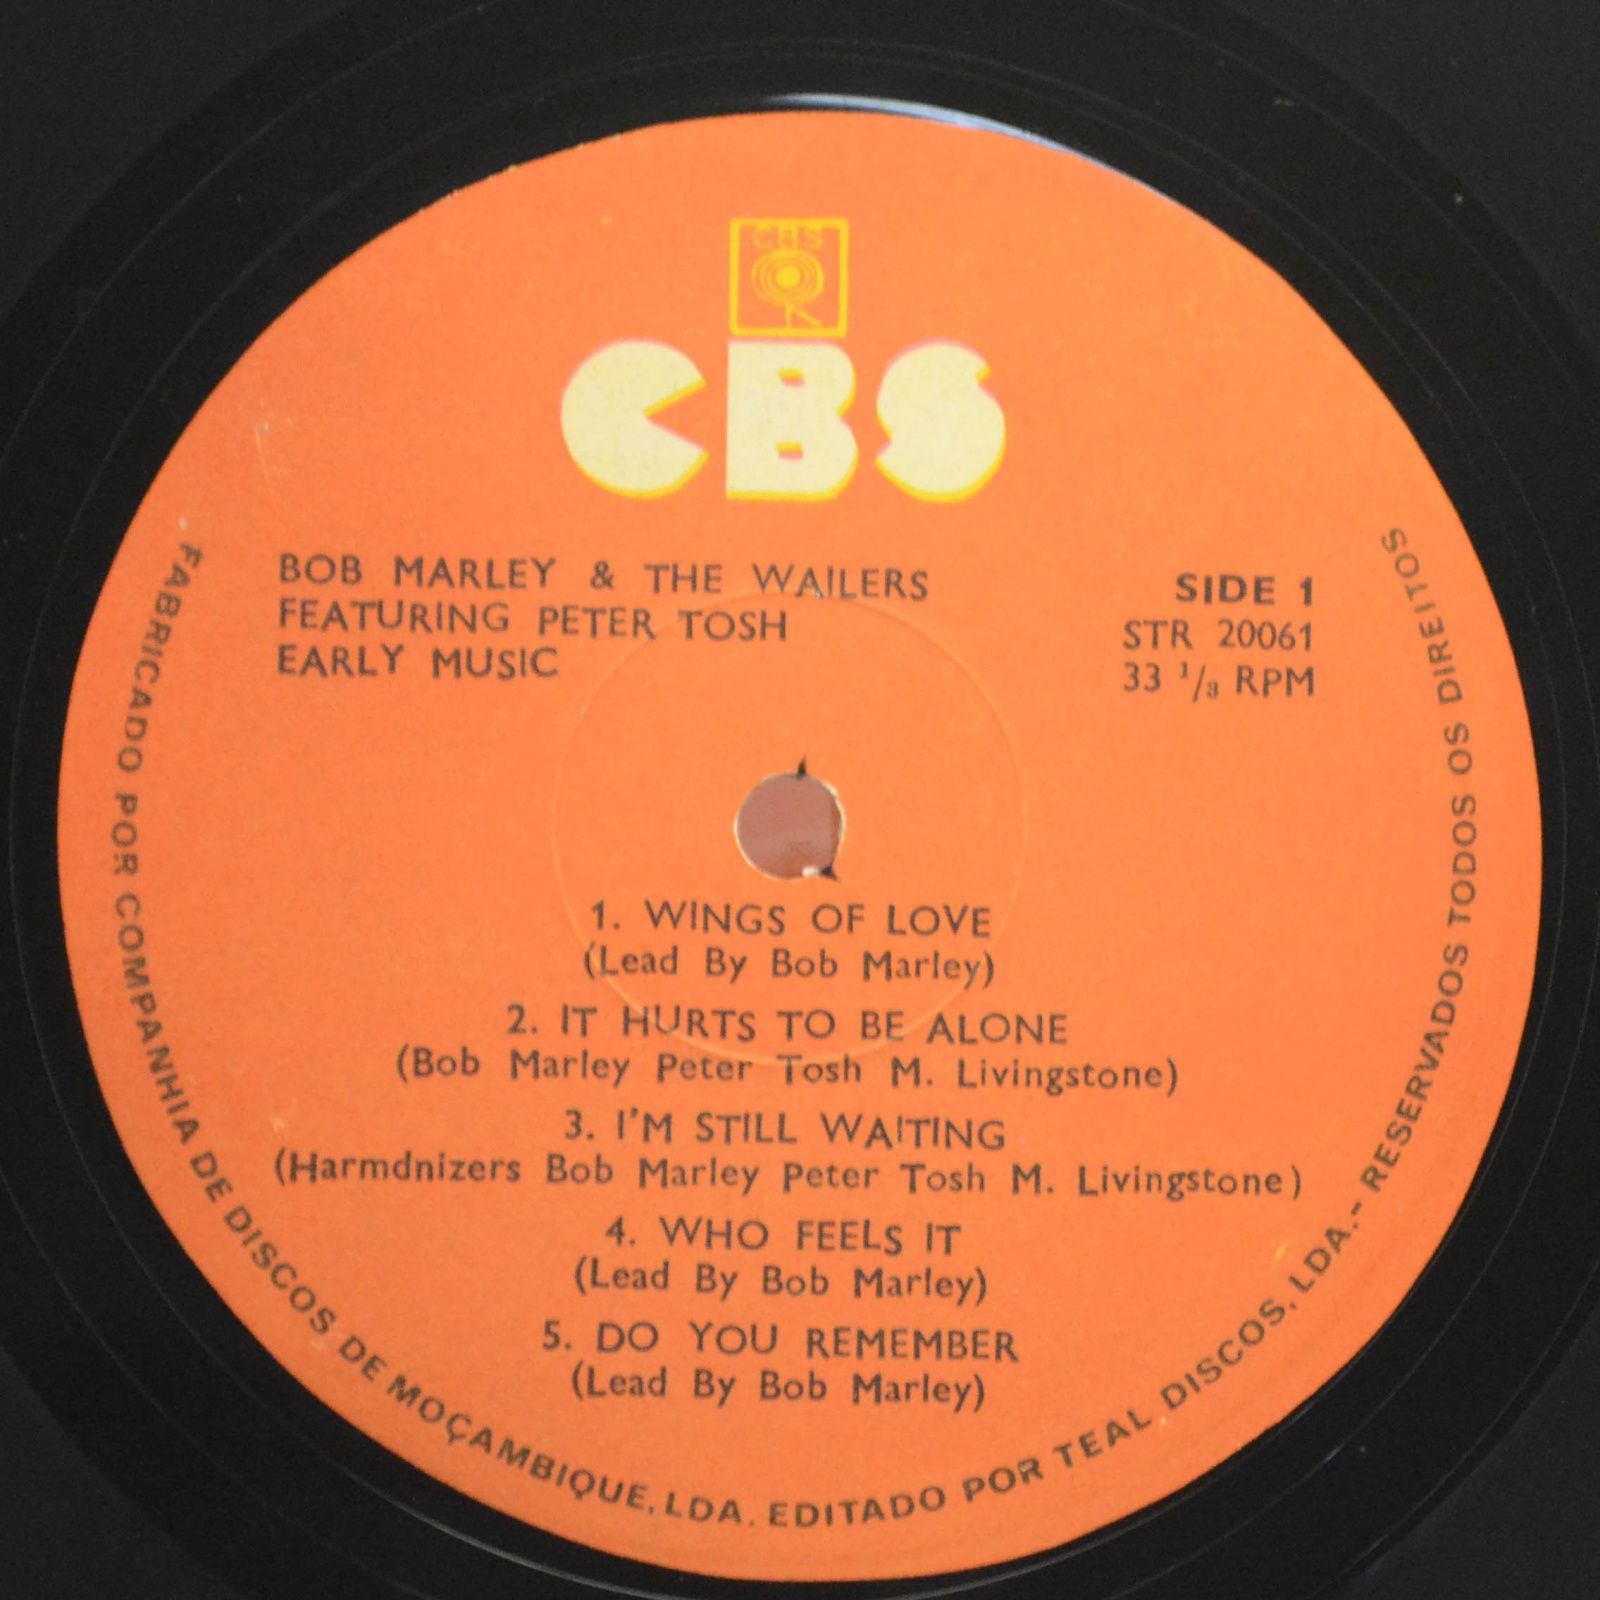 Bob Marley & The Wailers Featuring Peter Tosh — Early Music, 1979